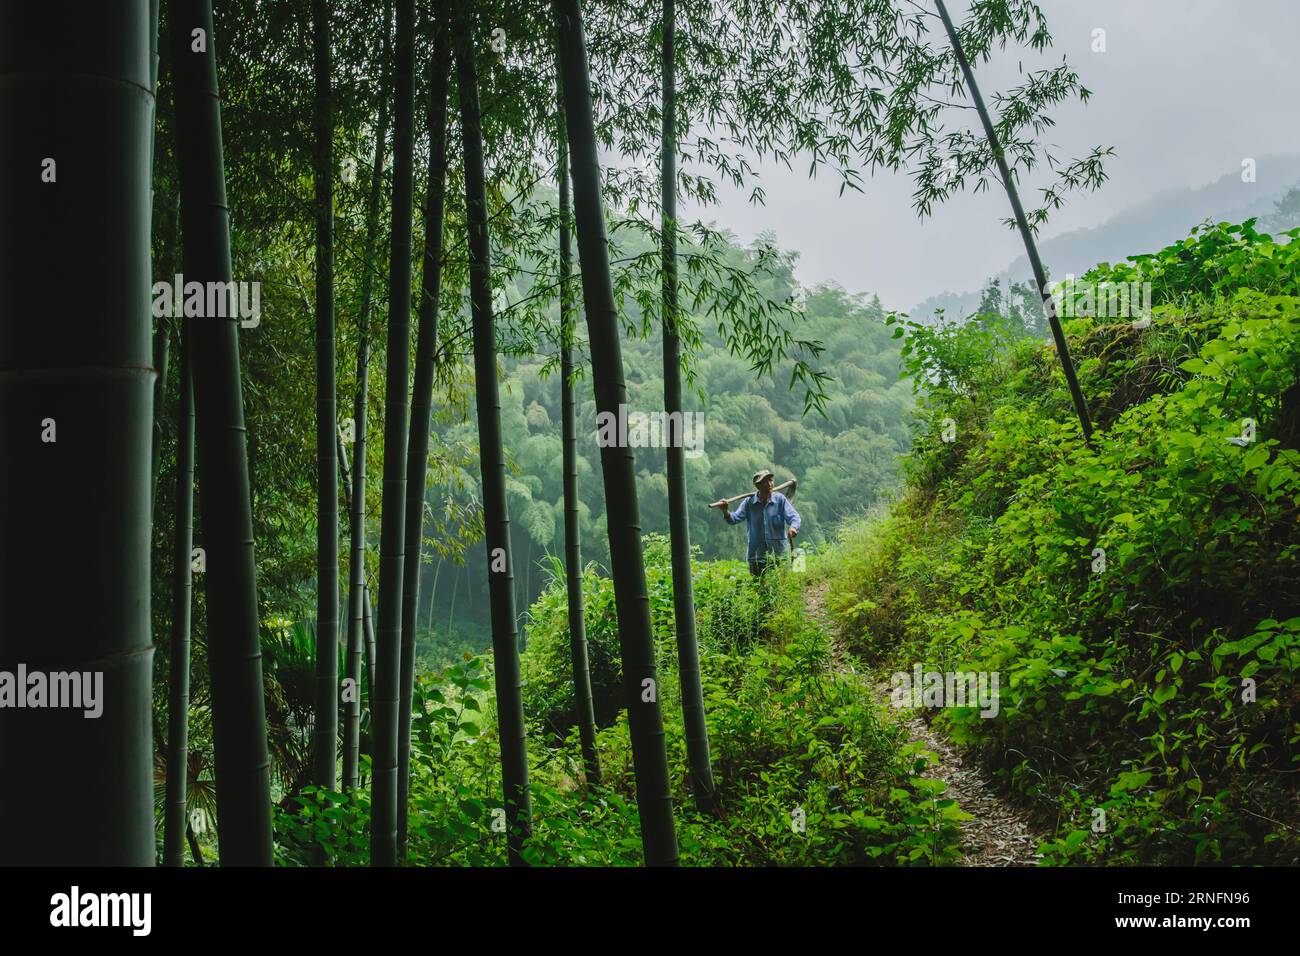 (160817) -- ZHEJIANG, Aug. 17, 2016 -- A peasant walks in the field in Daijiashan Village of Tonglu County in east China s Zhejiang Province, Aug. 7, 2016. Many picturesque villages tucked away in Zhejiang s mountainous area have centuries of history and abundant cultural traditions, waiting to be unveiled. ) (wx) CHINA-ZHEJIANG-VILLAGES-SCENERY (CN) ZhangxCheng PUBLICATIONxNOTxINxCHN   160817 Zhejiang Aug 17 2016 a Peasant Walks in The Field in  Village of Tonglu County in East China S Zhejiang Province Aug 7 2016 MANY picturesque Villages tucked Away in Zhejiang S mountainous Area have centu Stock Photo